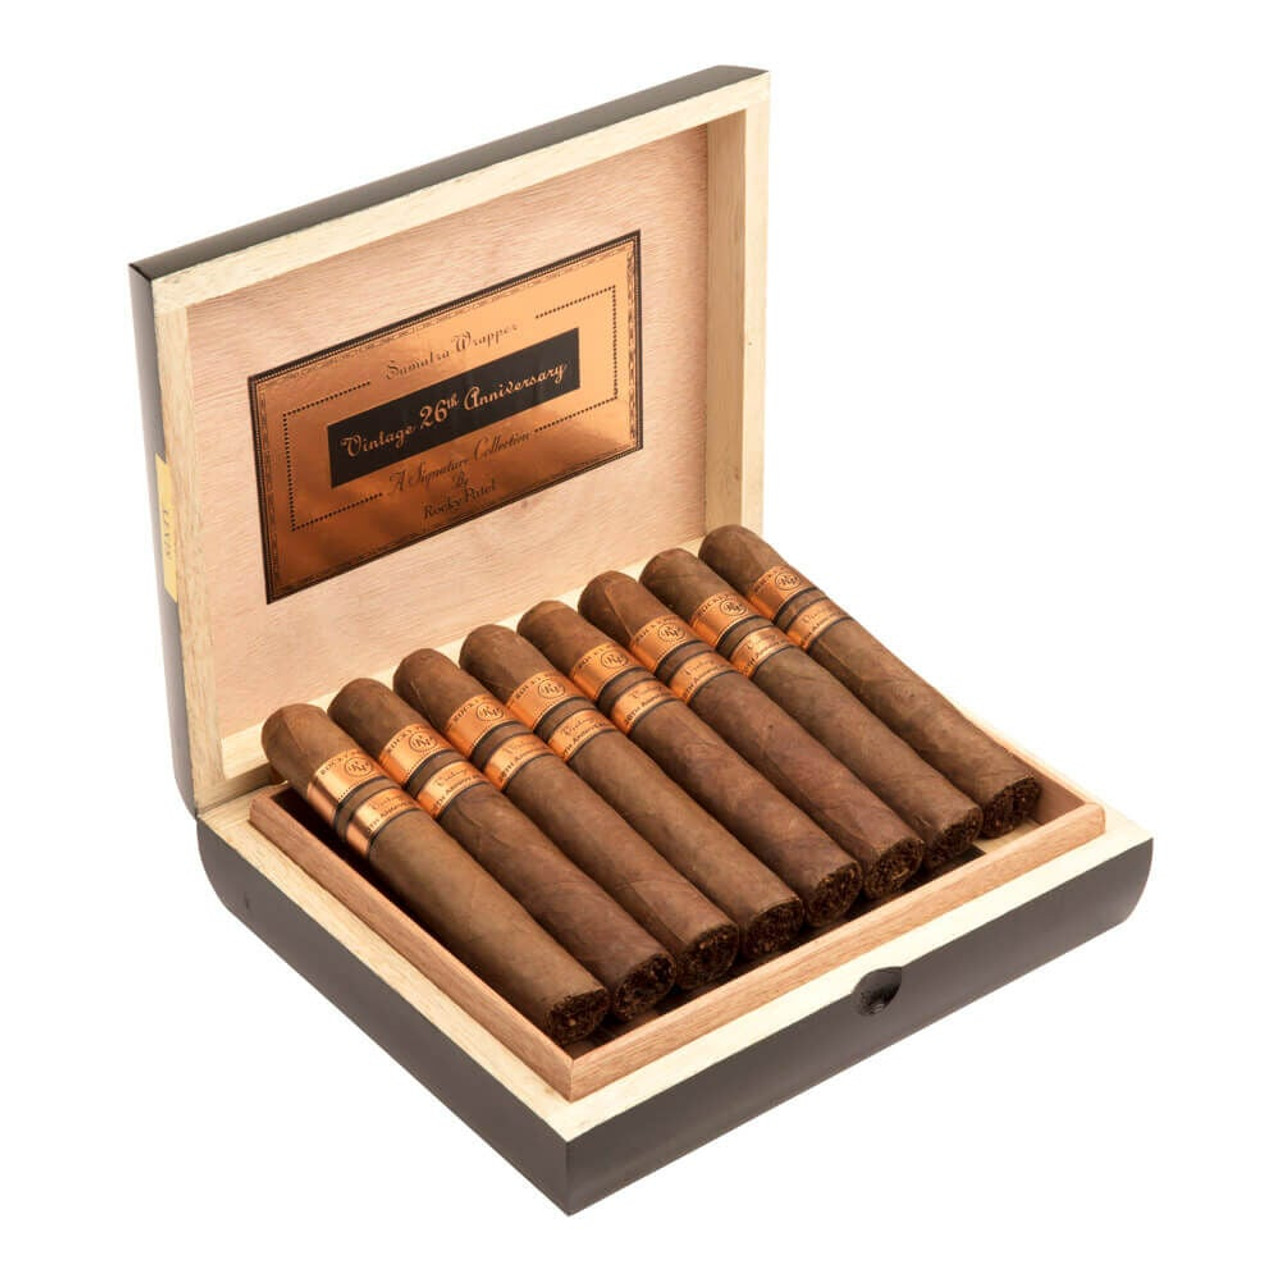 Rocky Patel Vintage 26th Annivesary Sixty Cigars - 6 x 60 (Box of 15) Open